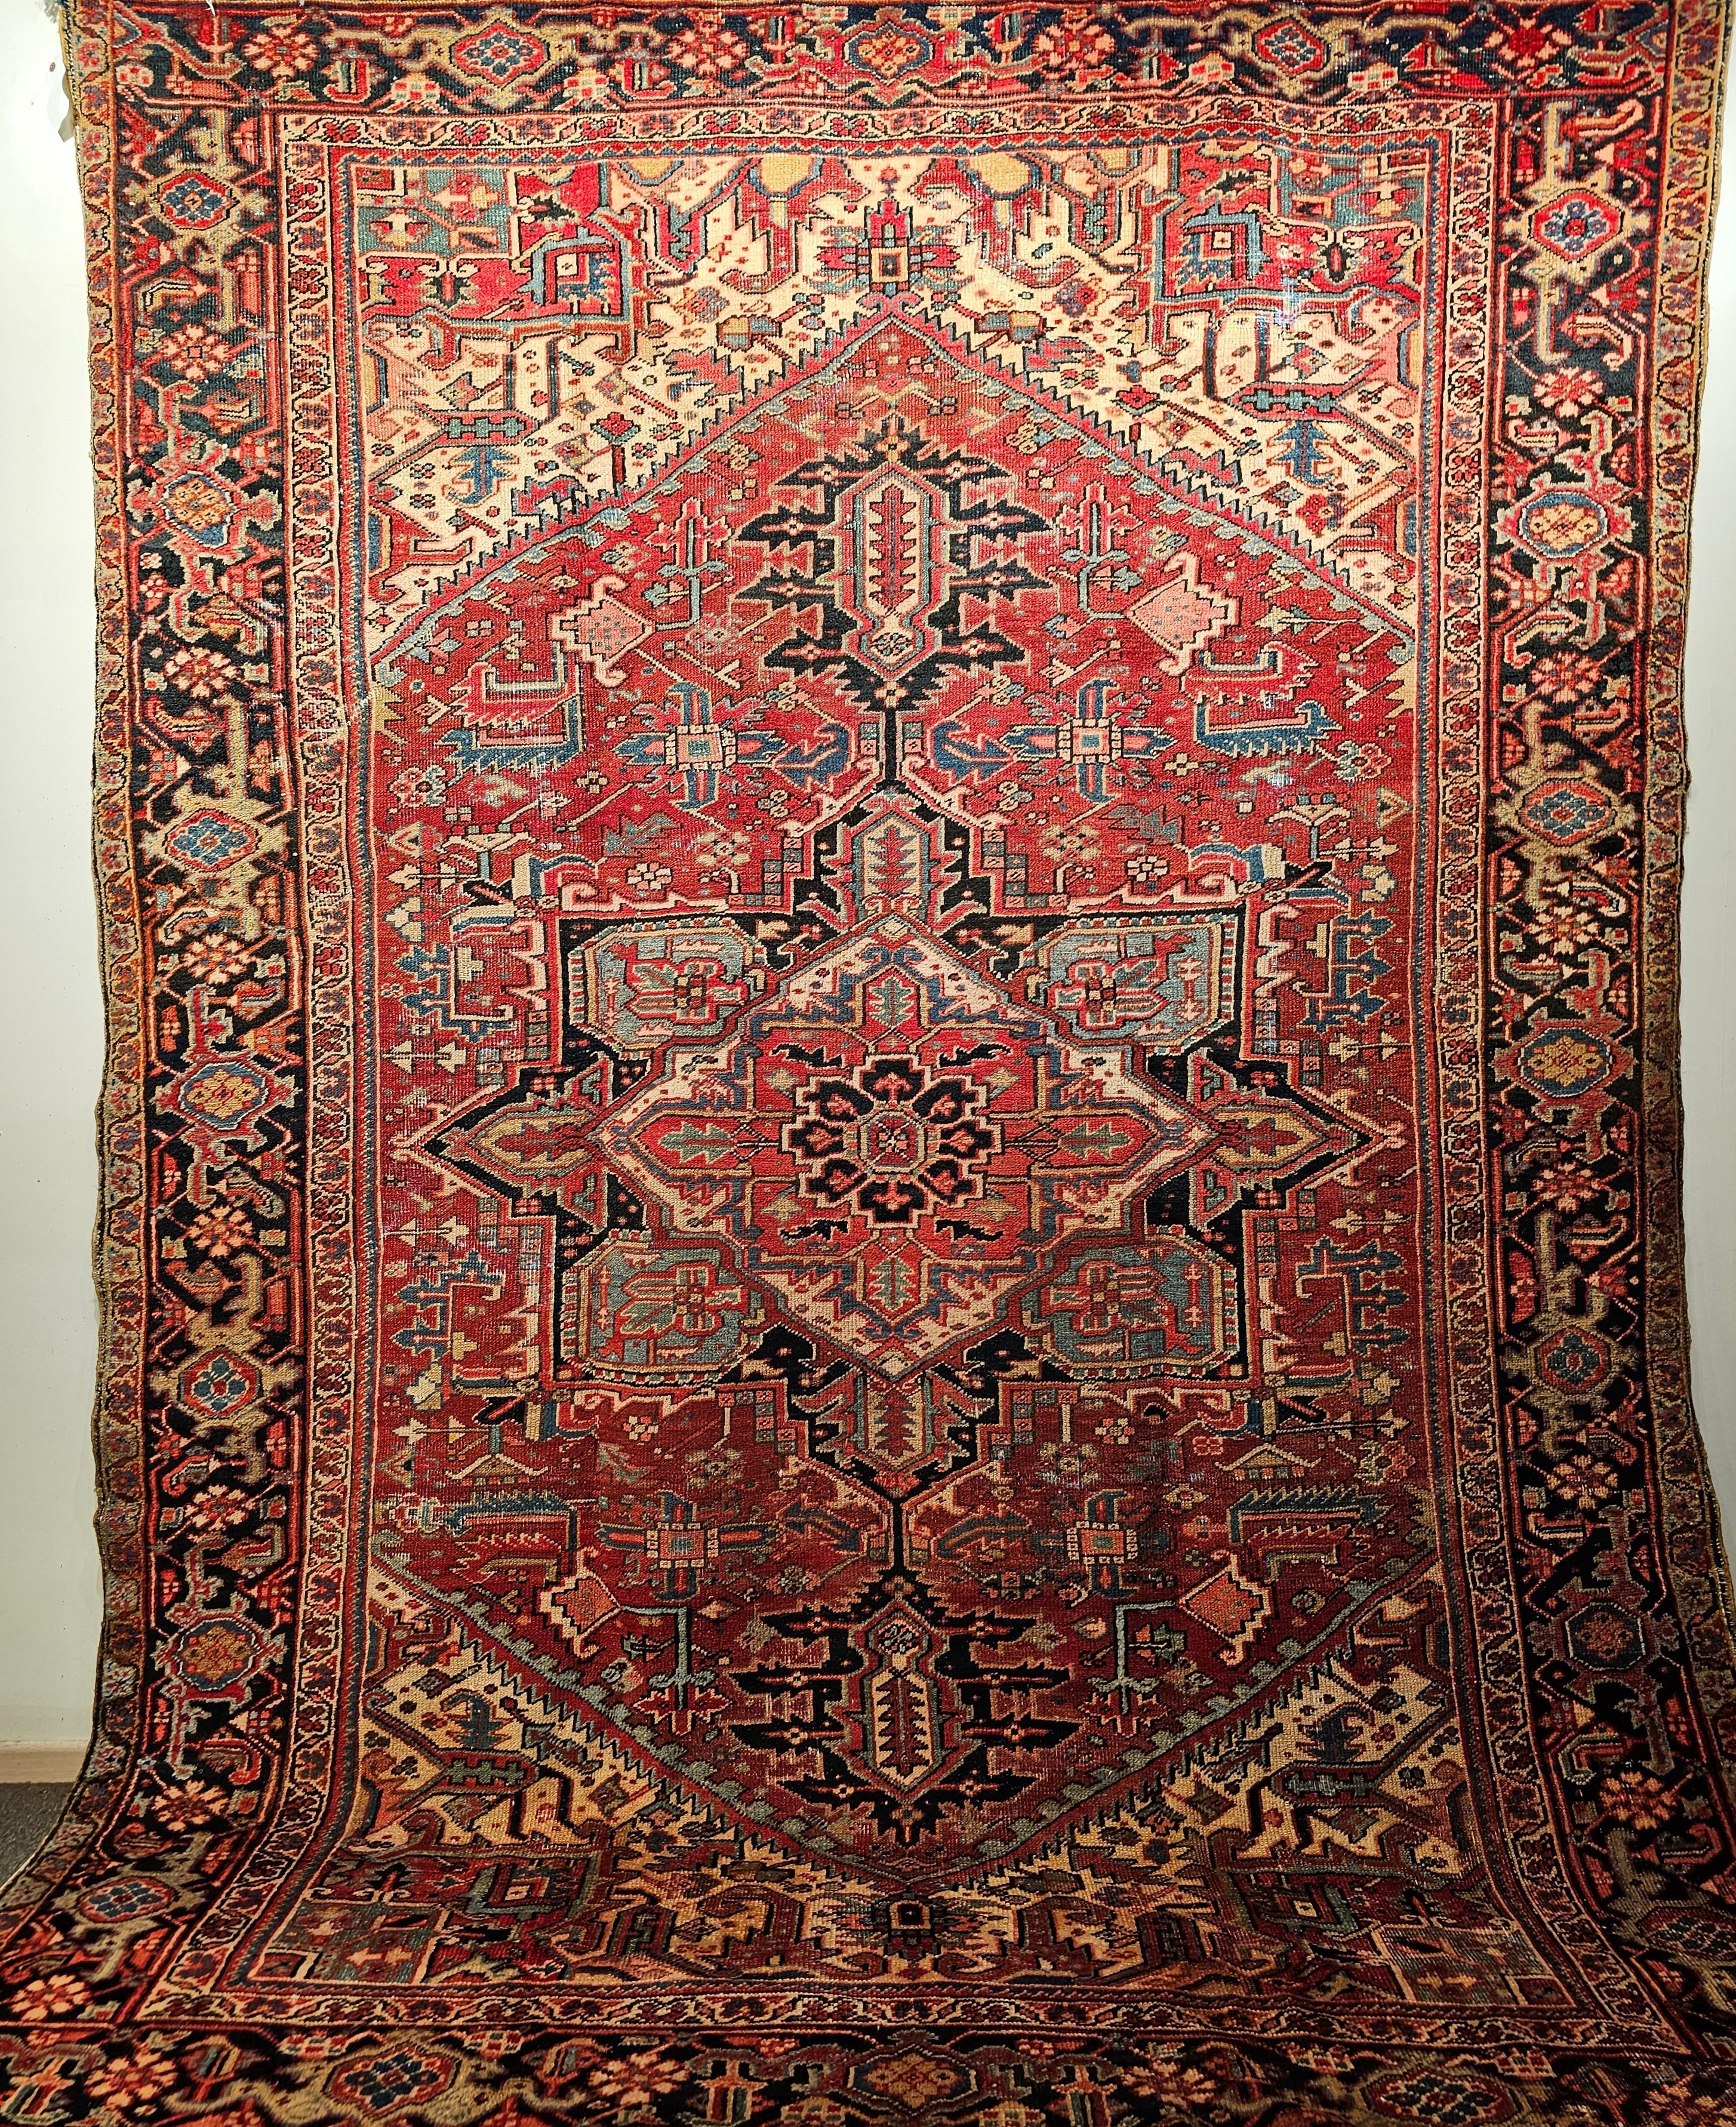 This Heriz rug from the 4th quarter of the 19th century shows the workmanship of the Azerbaijan village weavers of Northwest Persia. The Heriz has an open field design with the light yellow color in the spandrels and in the corners the brilliant